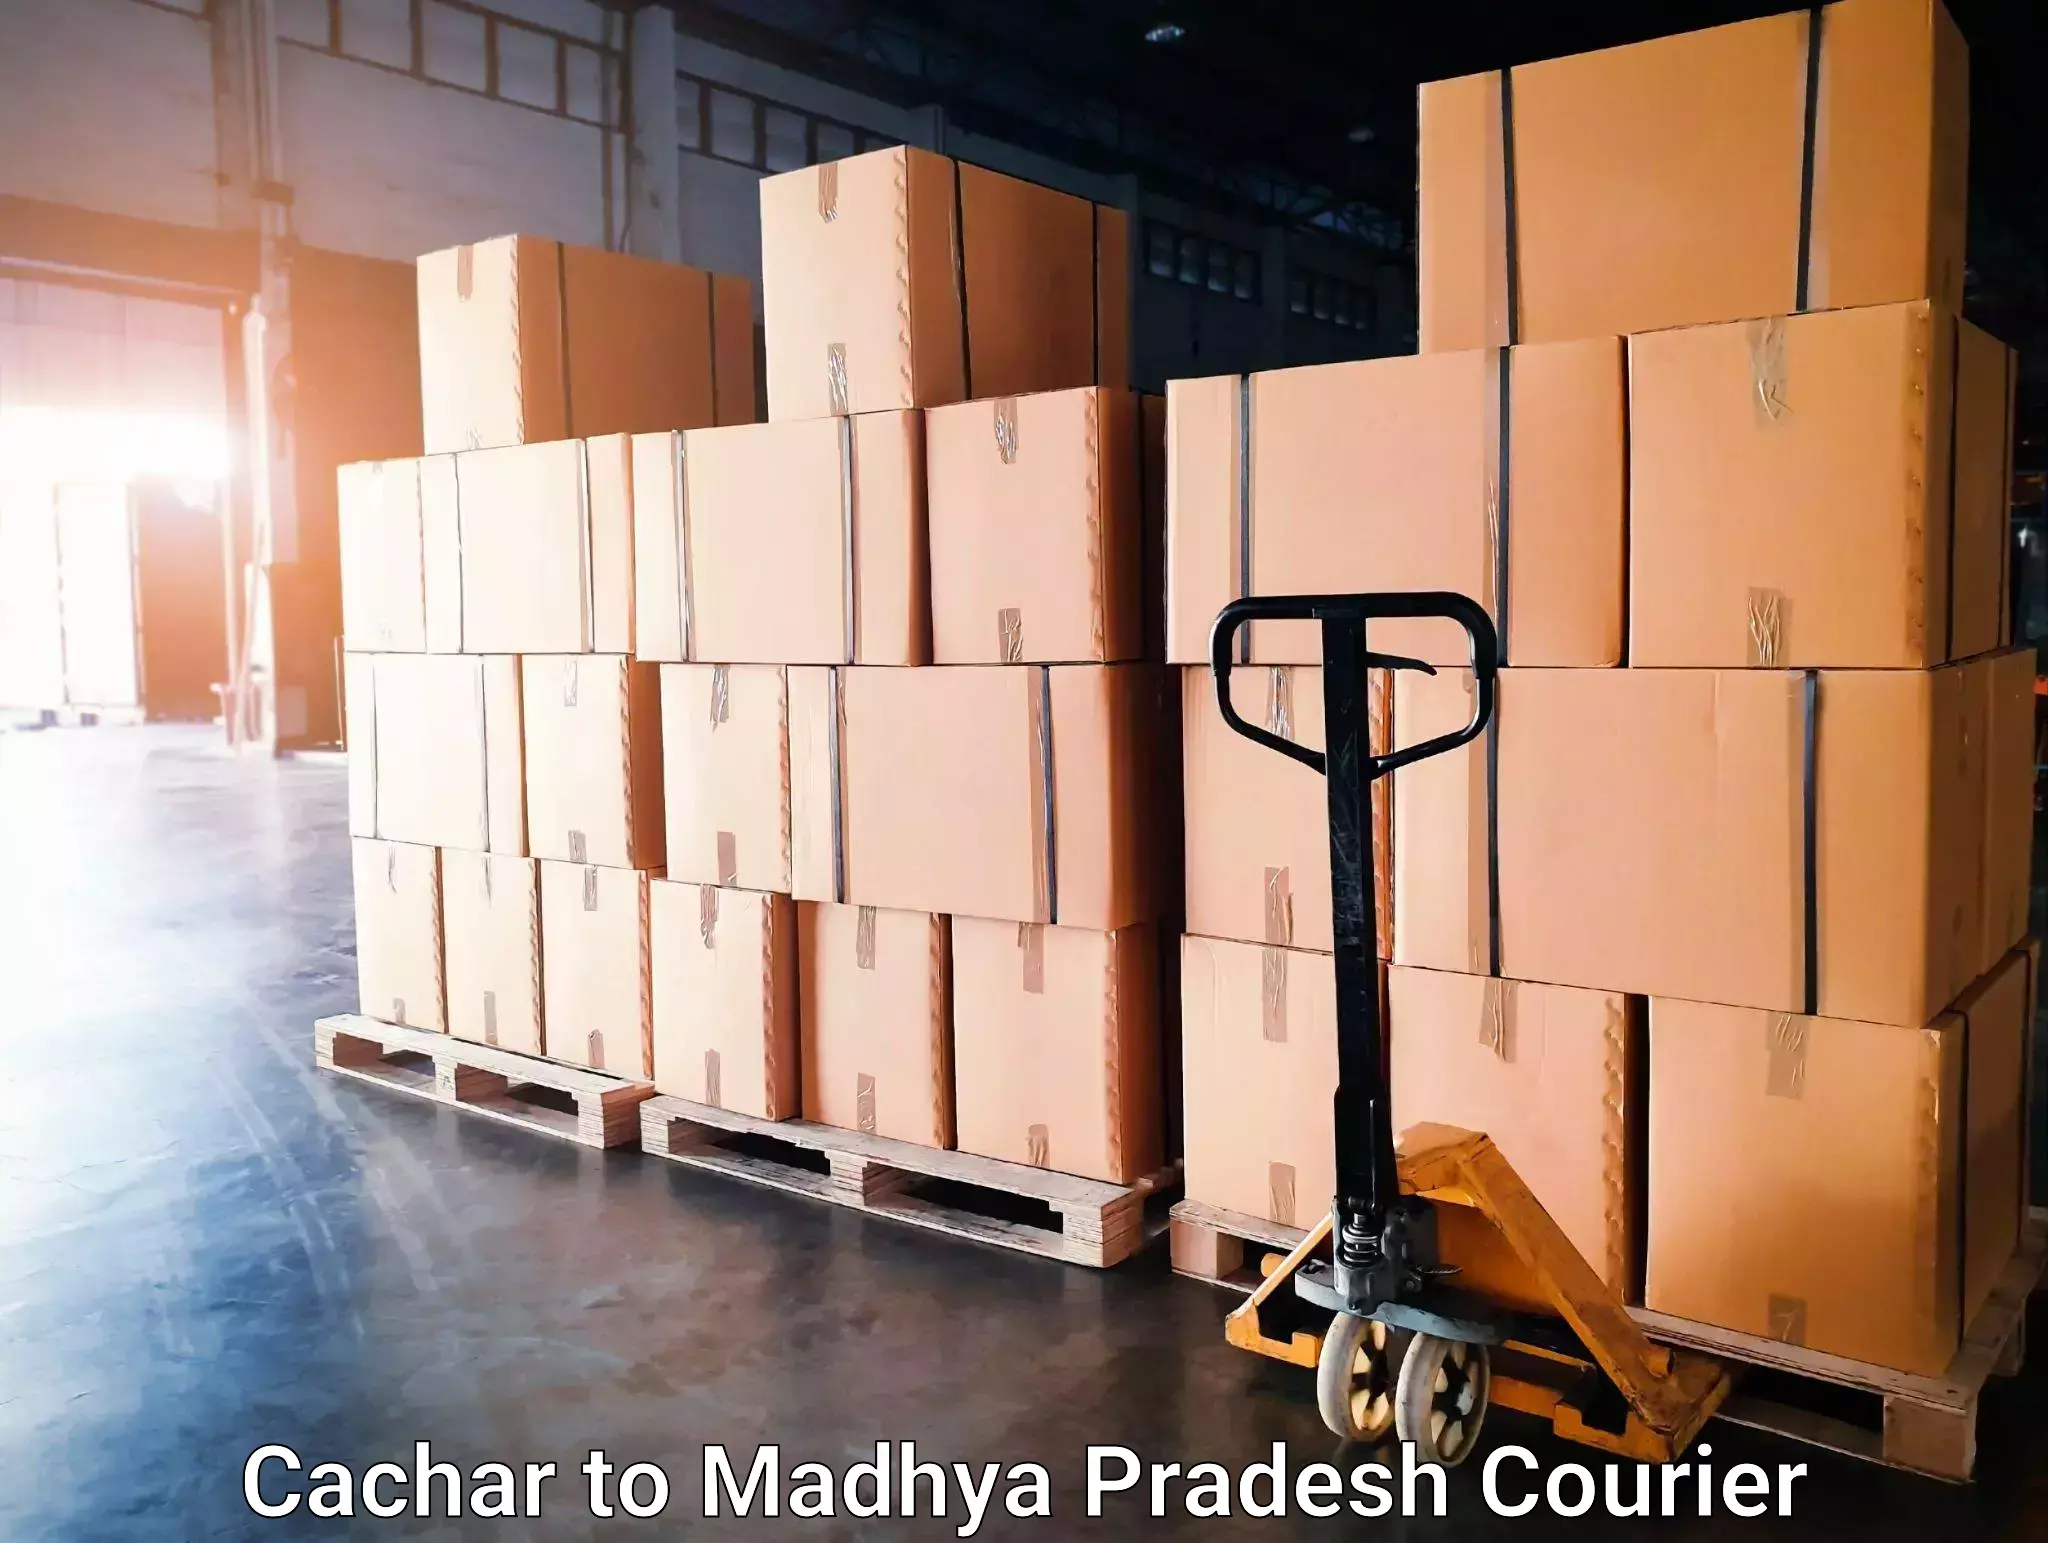 Nationwide parcel services Cachar to Ratlam